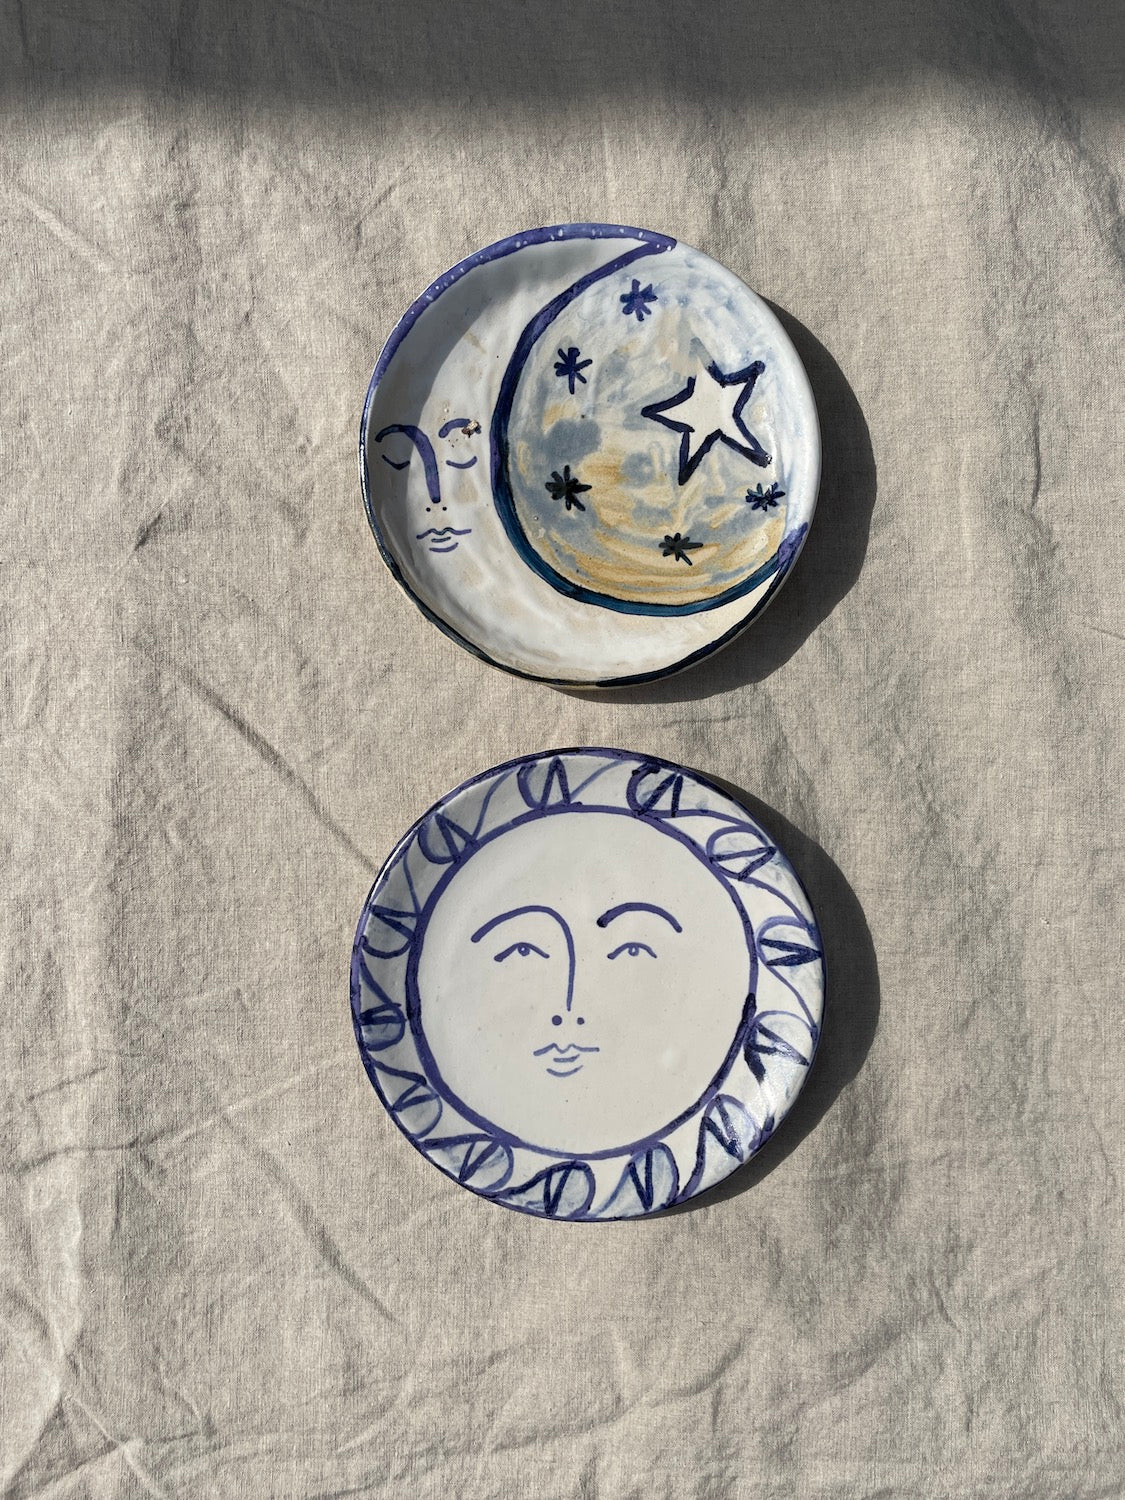 Ceramic plates titled Sun Plate and Moon Plate, painted by the artist Frances Costelloe.